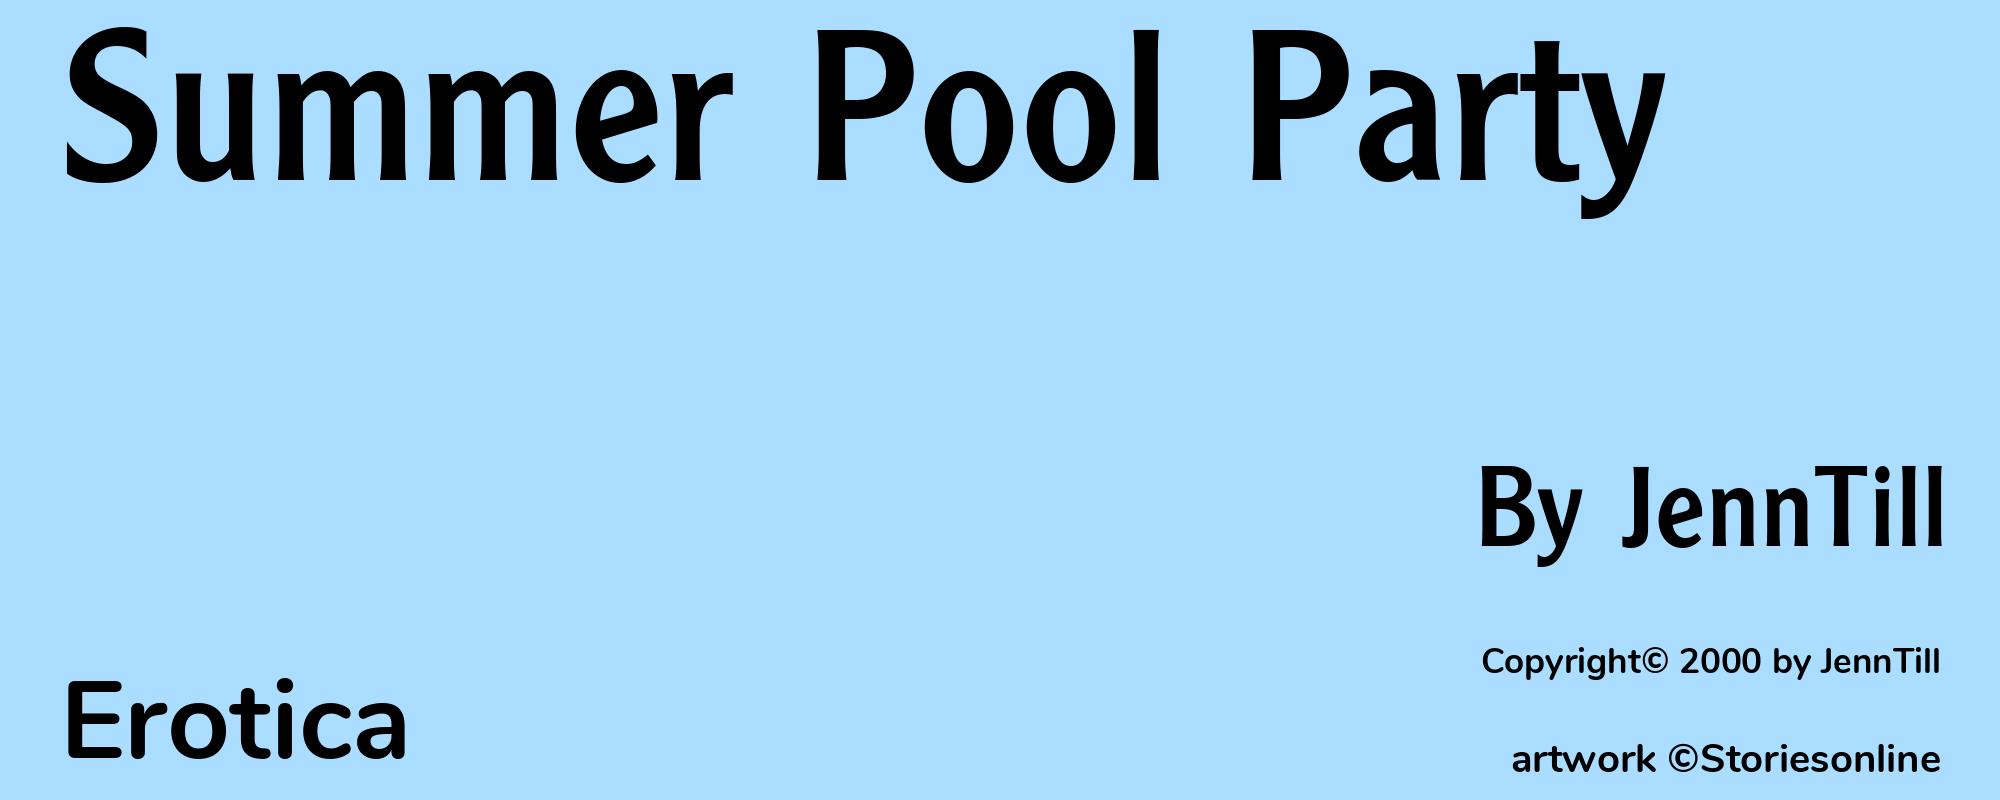 Summer Pool Party - Cover